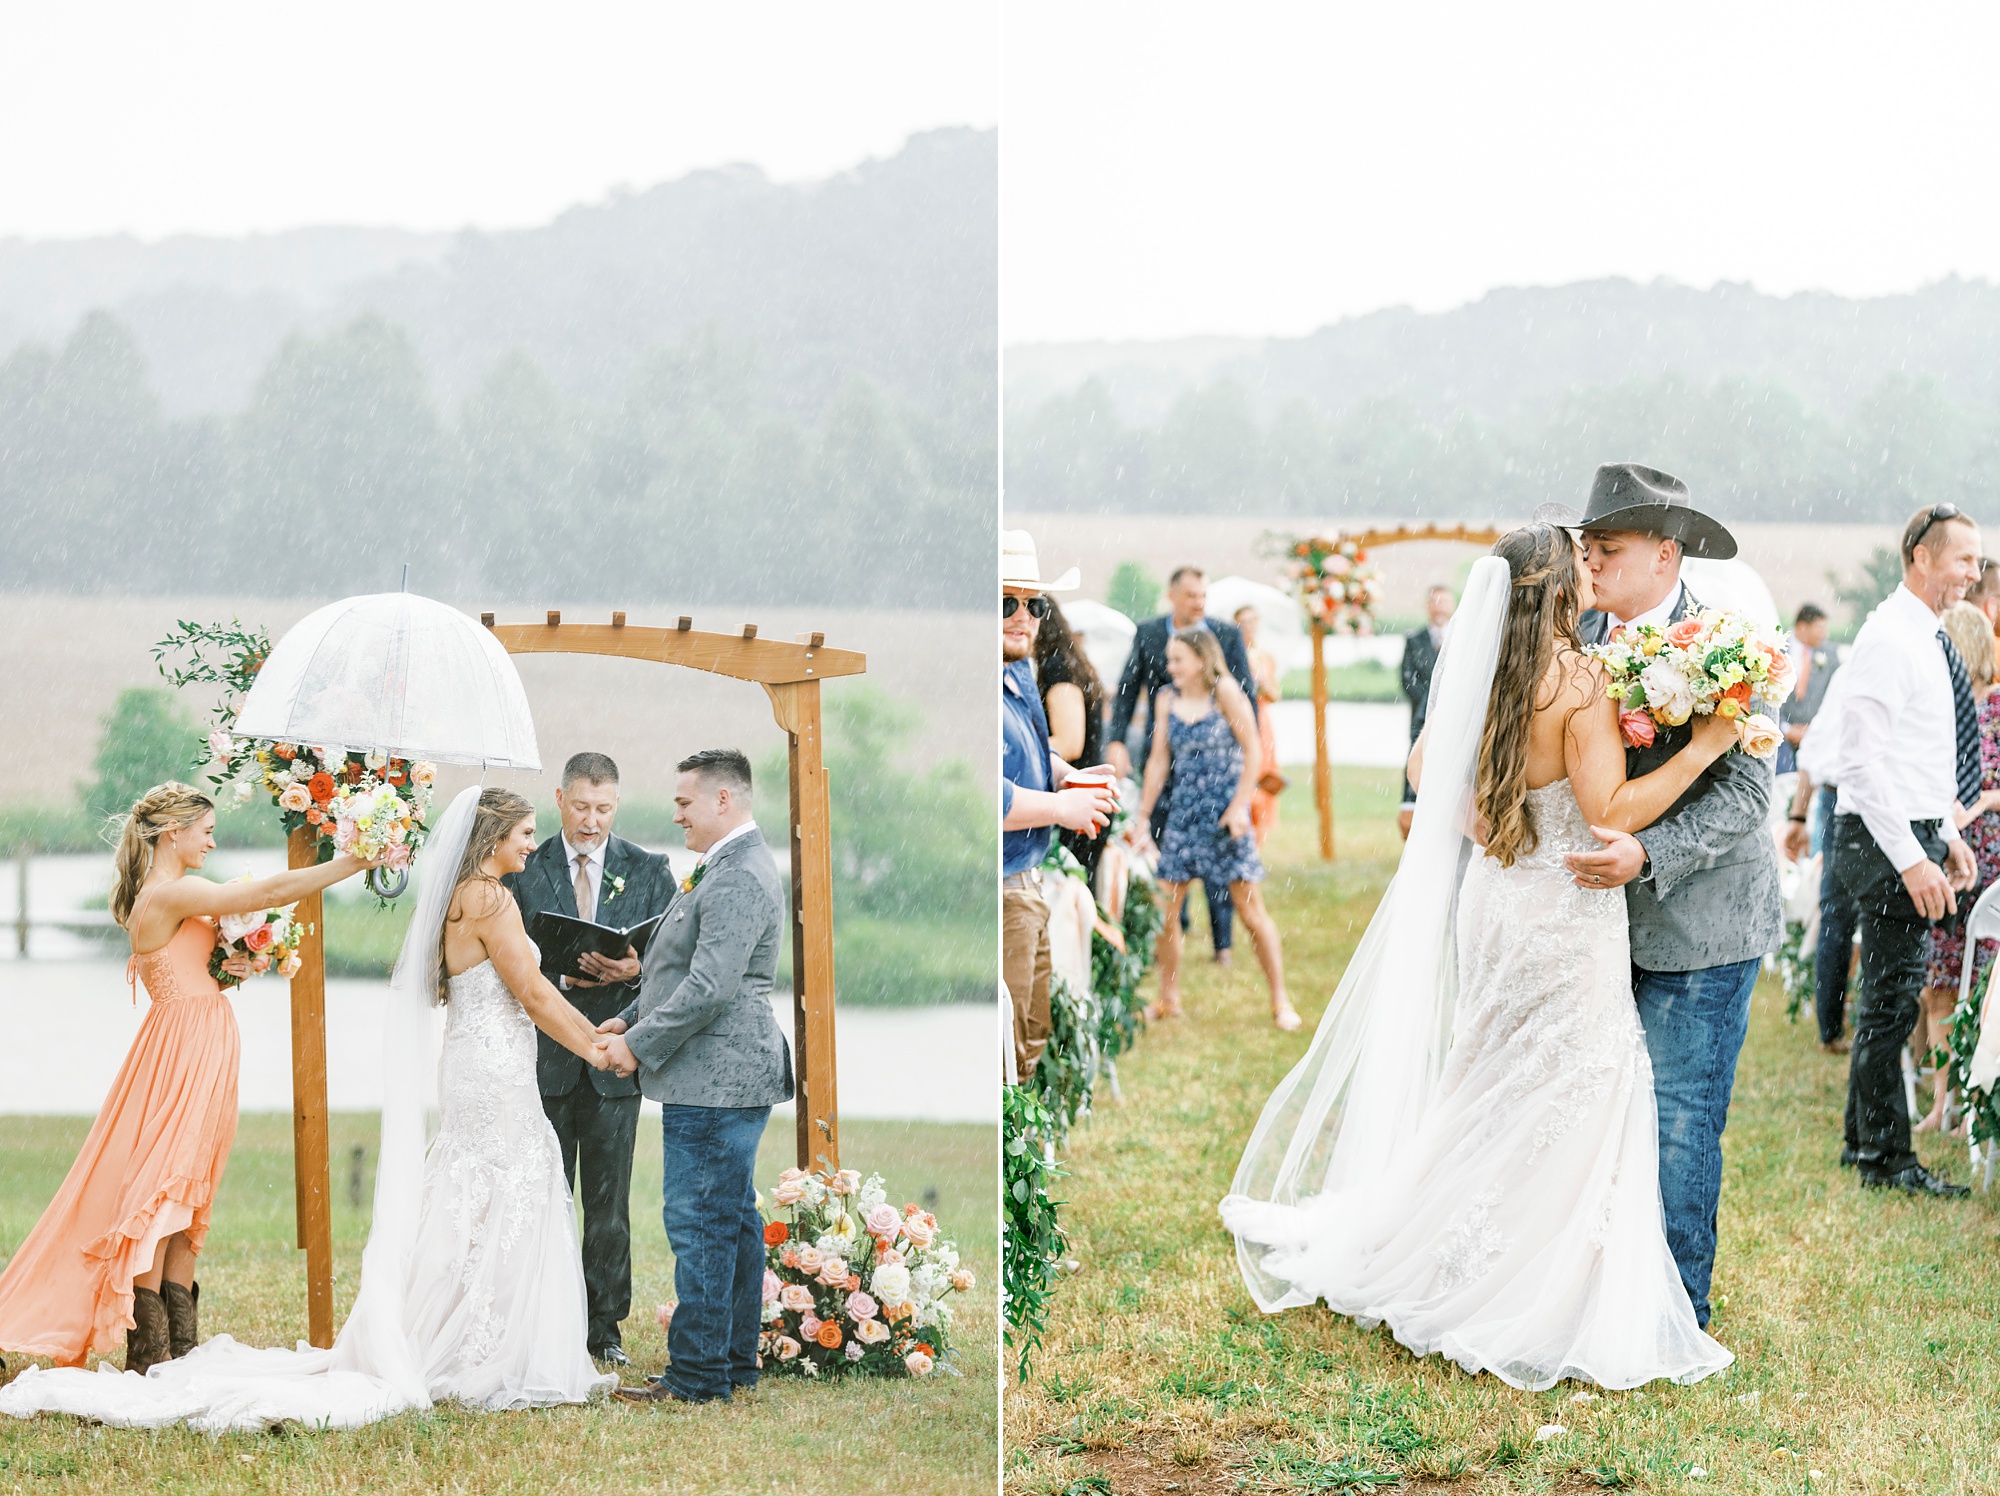 Rainy Wedding Day Must-Haves: my favorite Amazon finds to keep rainy wedding days dry shared by NC wedding photographer Kevyn Dixon